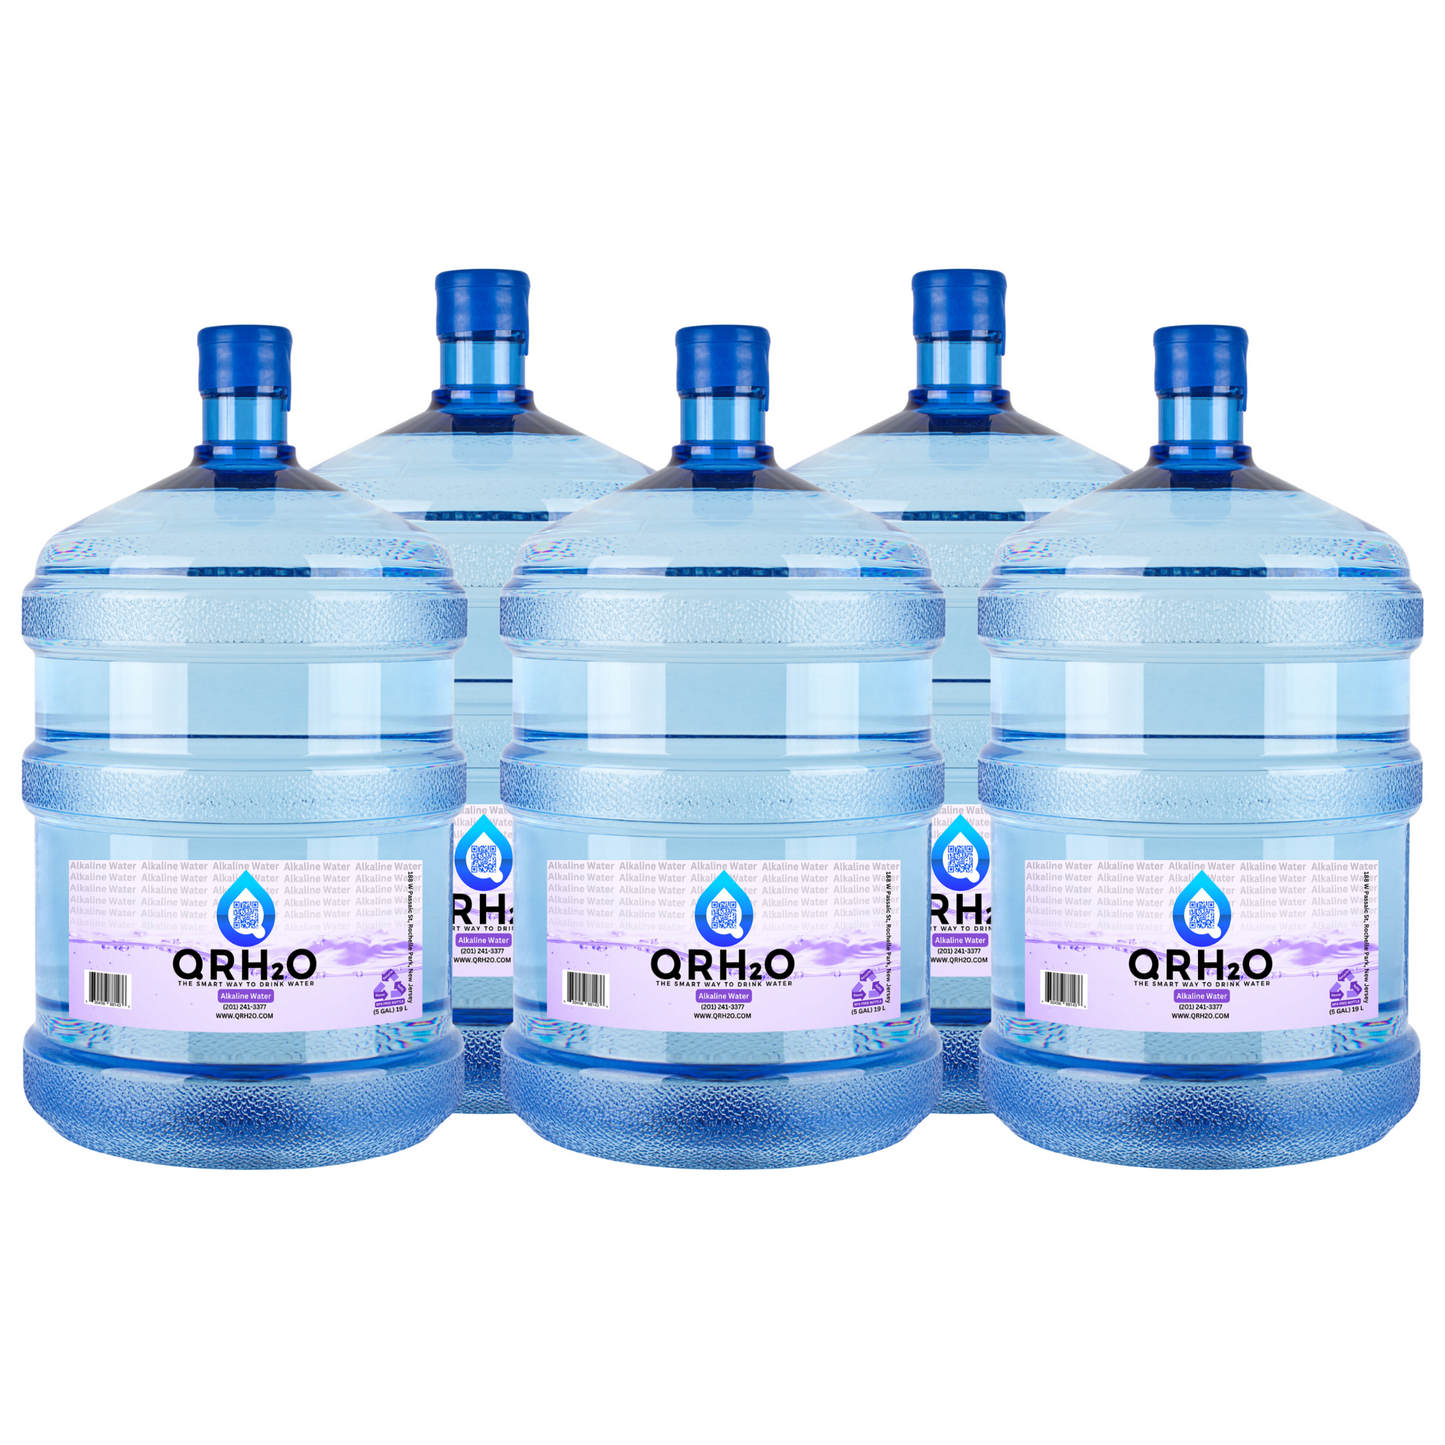 Stay hydrated with 5 of our 5-gallon BPA-free bottles filled with 100% alkaline water - perfect for maintaining a balanced pH level in your body.